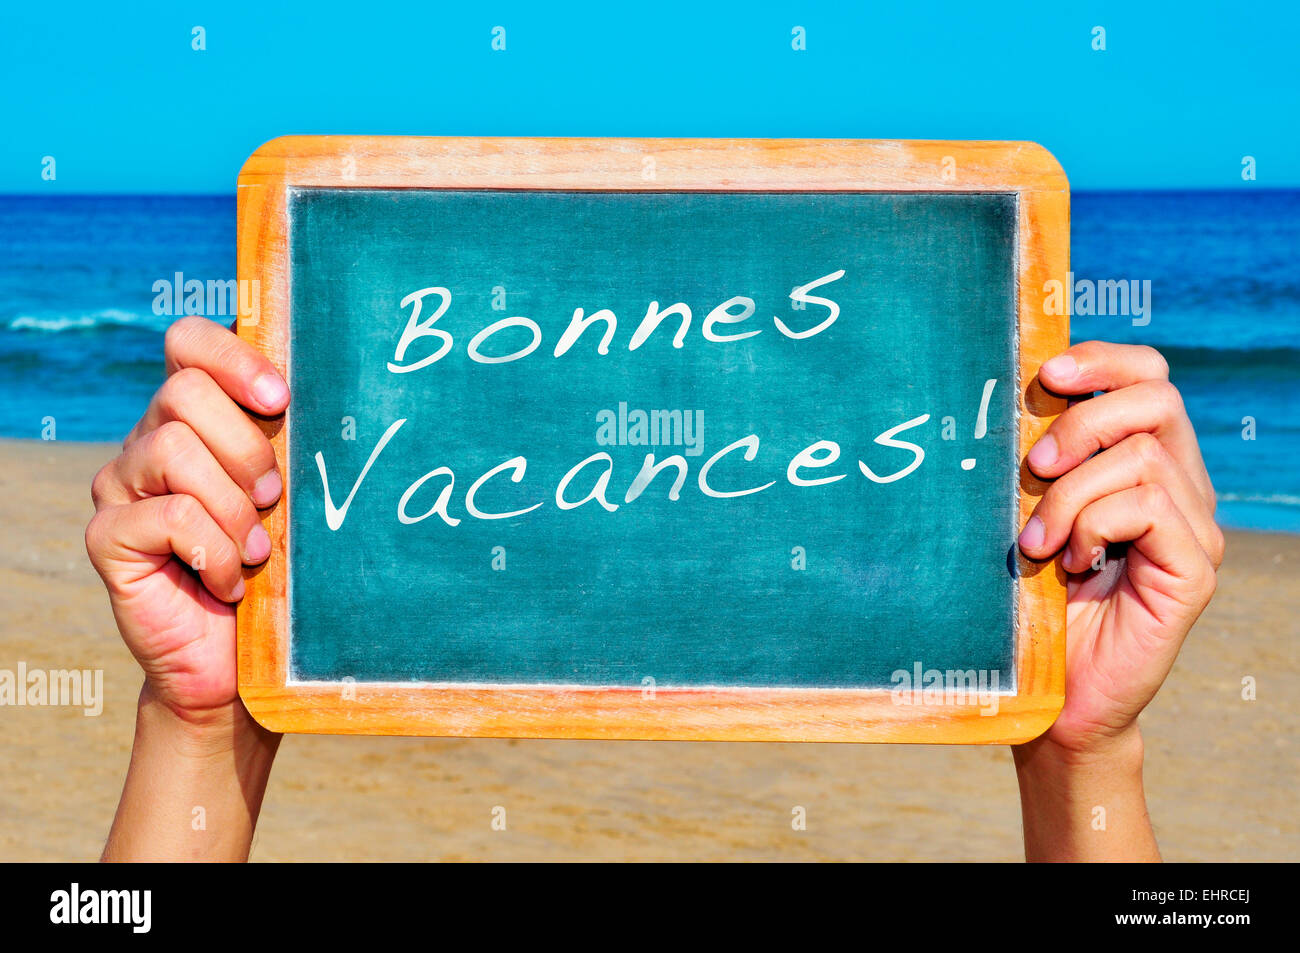 young man holding a blackboard on the beach with the sentenece bonnes vacances, happy vacations in french, written on it Stock Photo